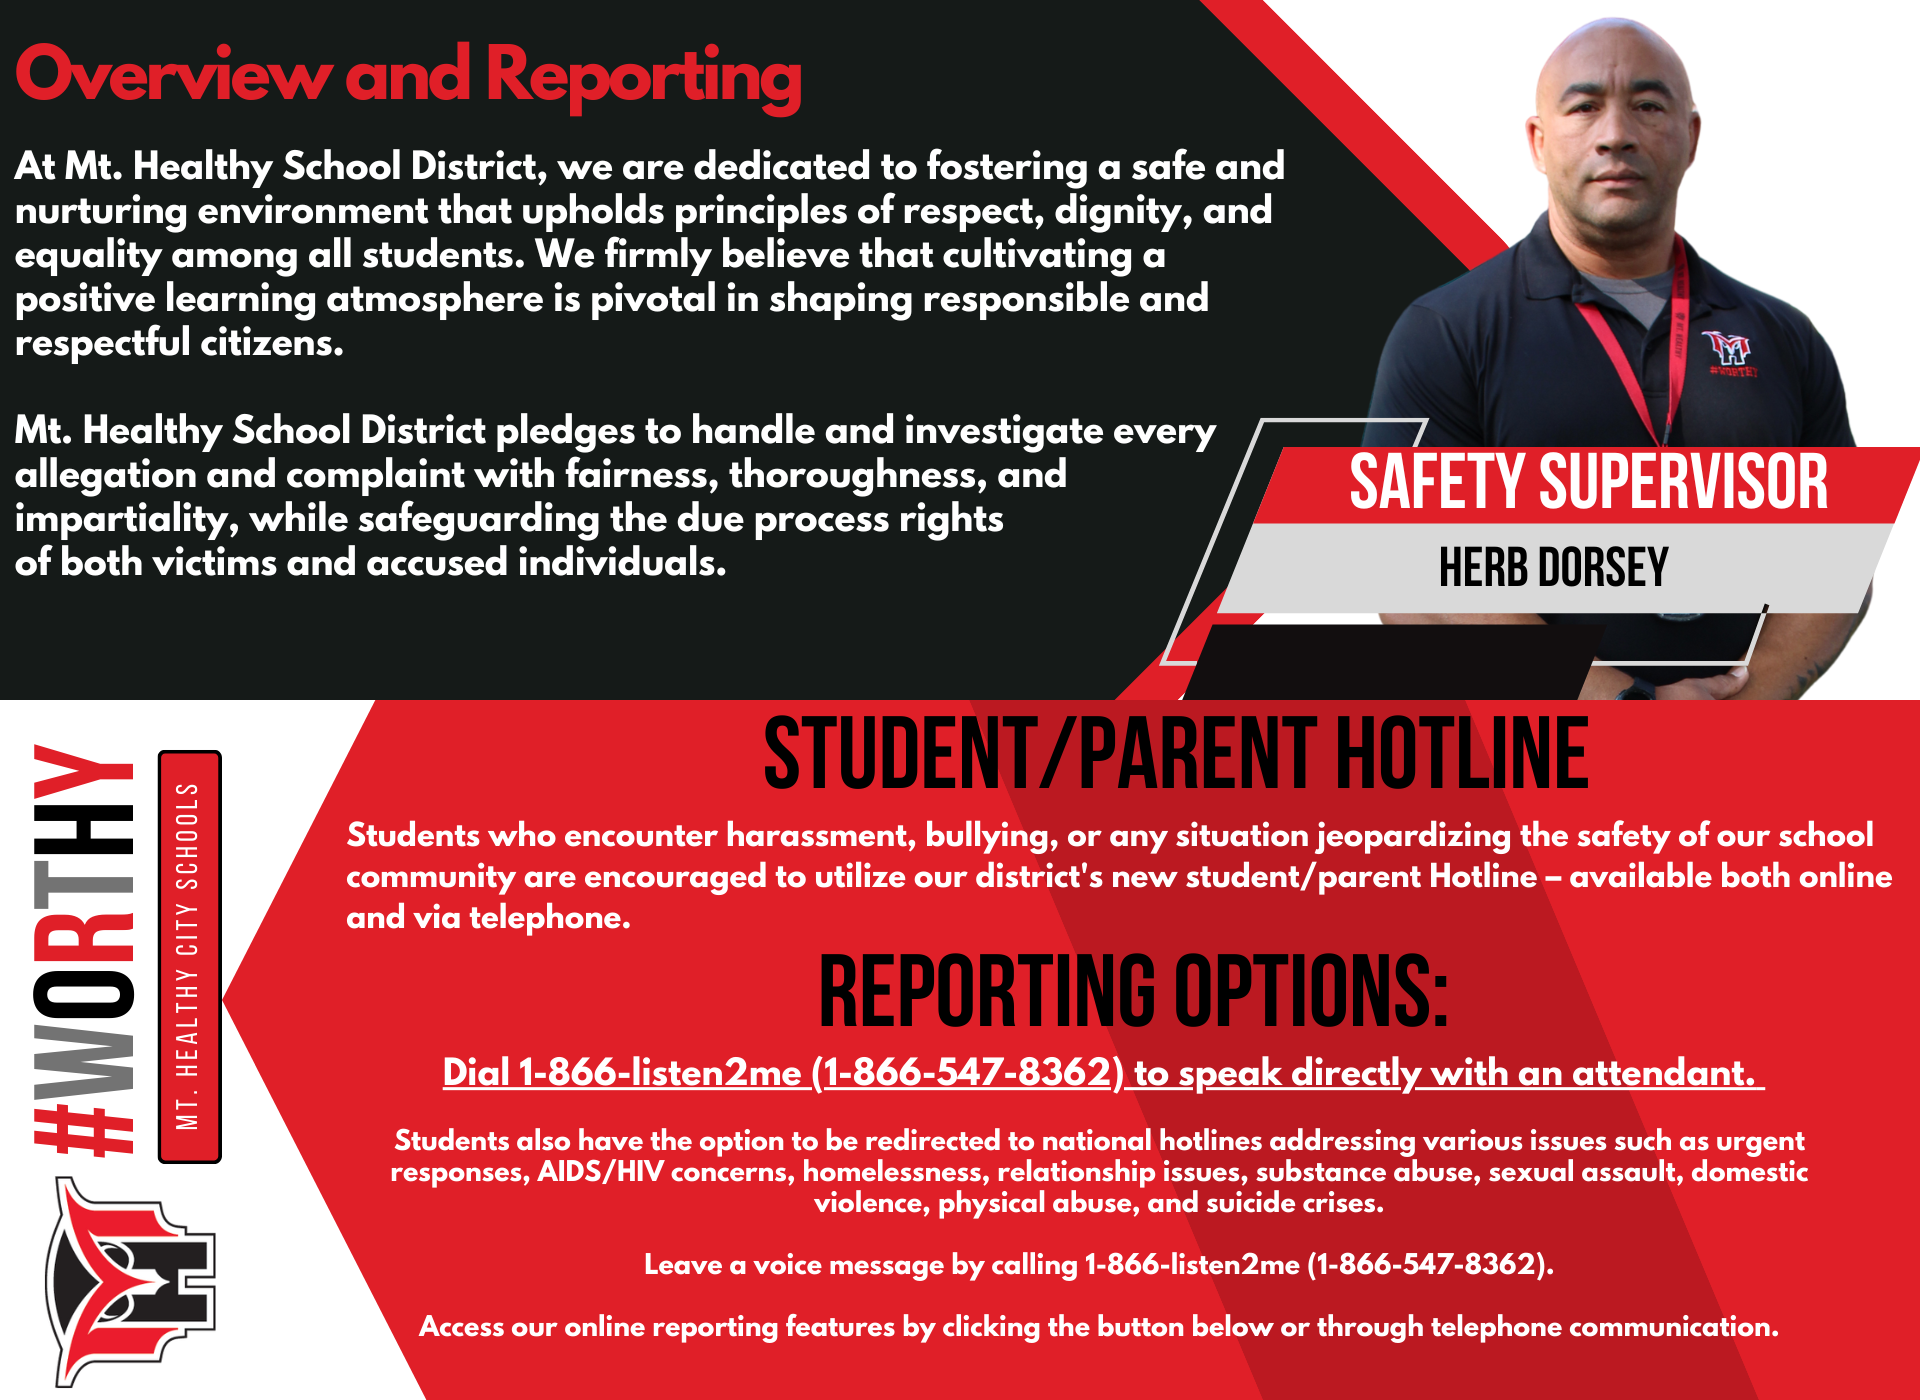 Dial 1-866-listen2me (1-866-547-8362) to speak directly with an attendant.   Students also have the option to be redirected to national hotlines addressing various issues such as urgent responses, AIDS/HIV concerns, homelessness, relationship issues, substance abuse, sexual assault, domestic violence, physical abuse, and suicide crises.  Leave a voice message by calling 1-866-listen2me (1-866-547-8362).  Access our online reporting features by clicking the button below or through telephone communication.